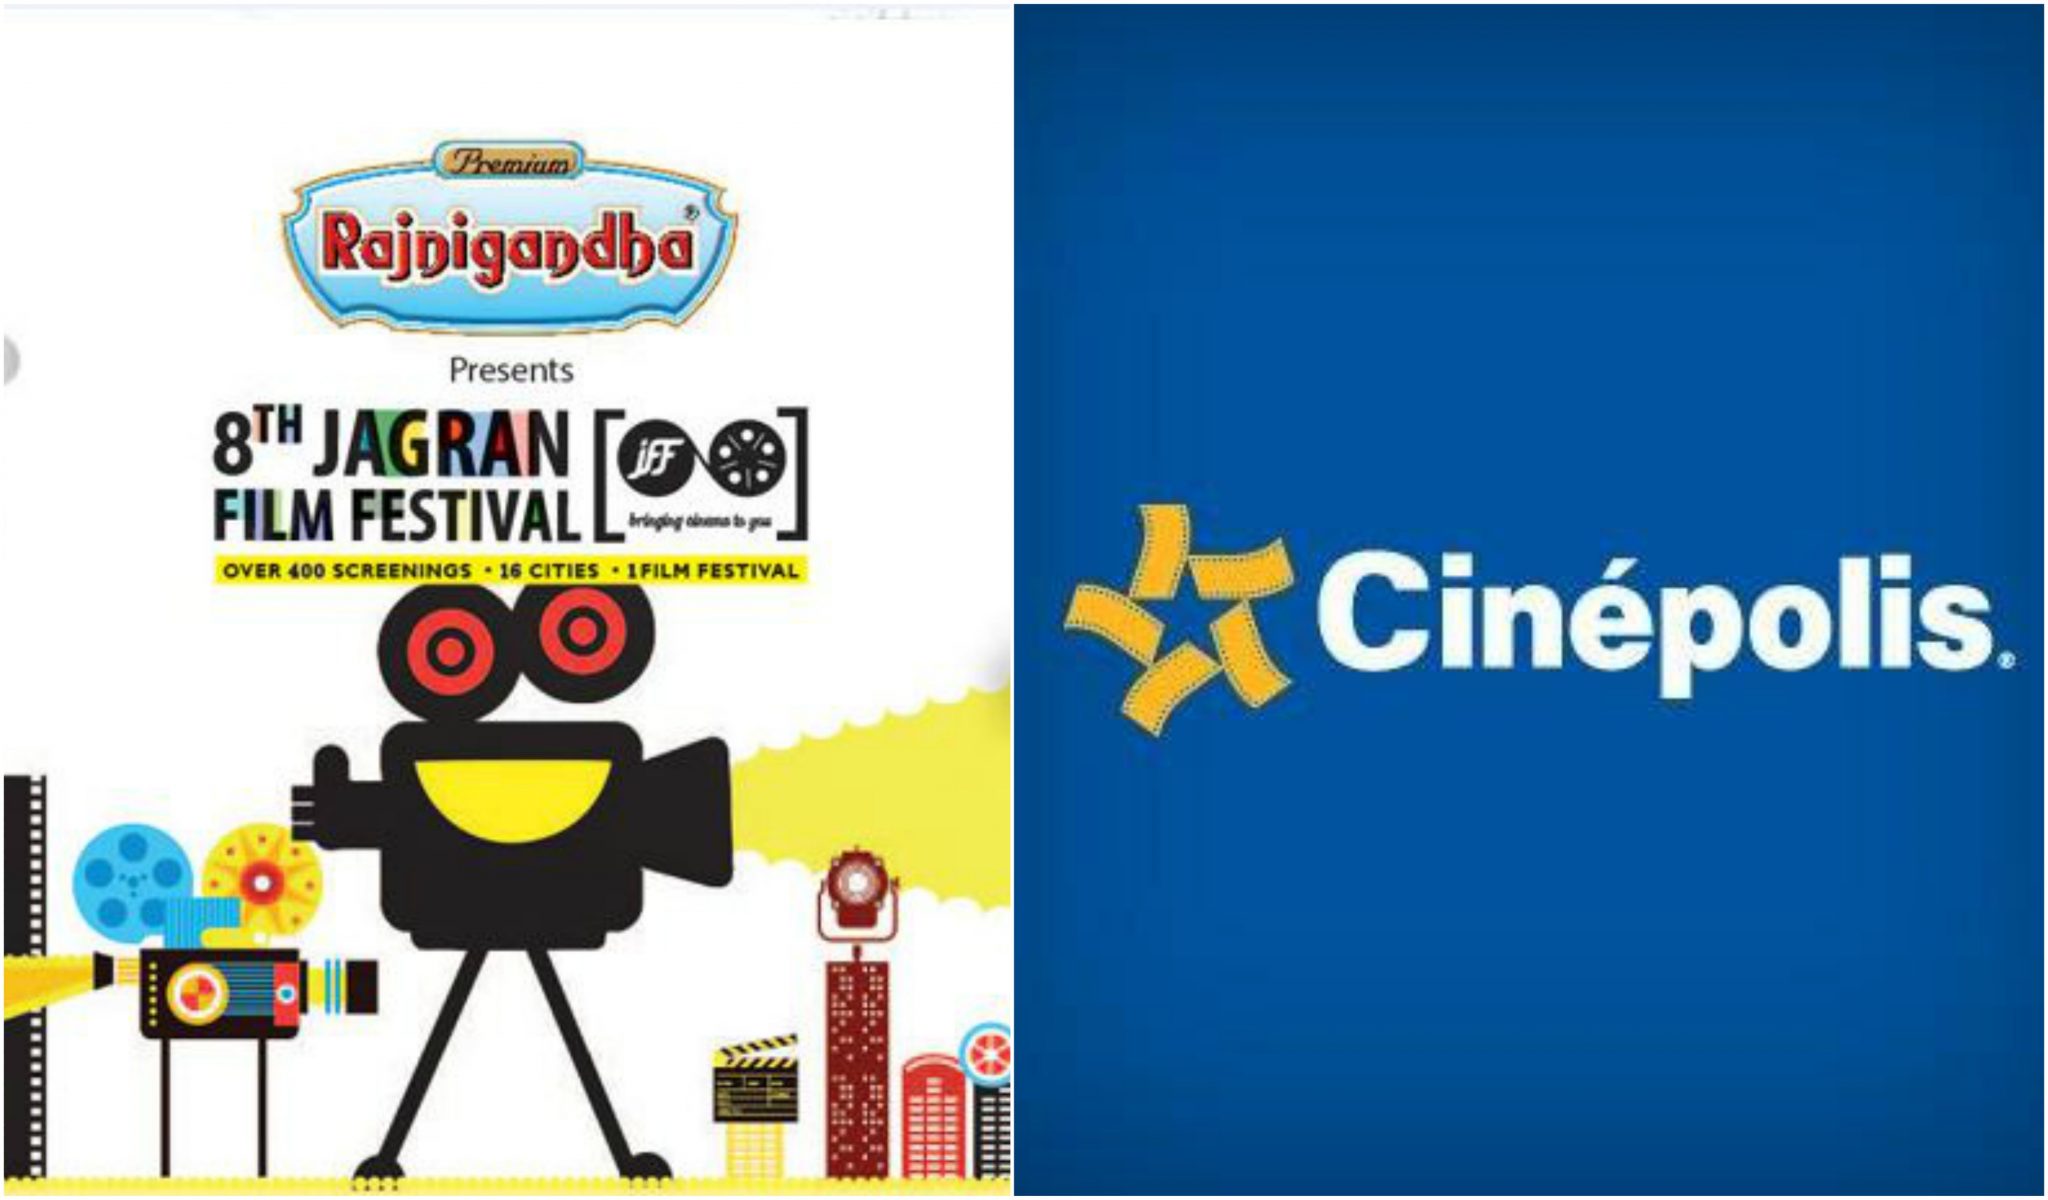 Film-makers, Just 2 Weeks Left To Enter The Mumbai Leg of The 8th Jagran Film Festival!